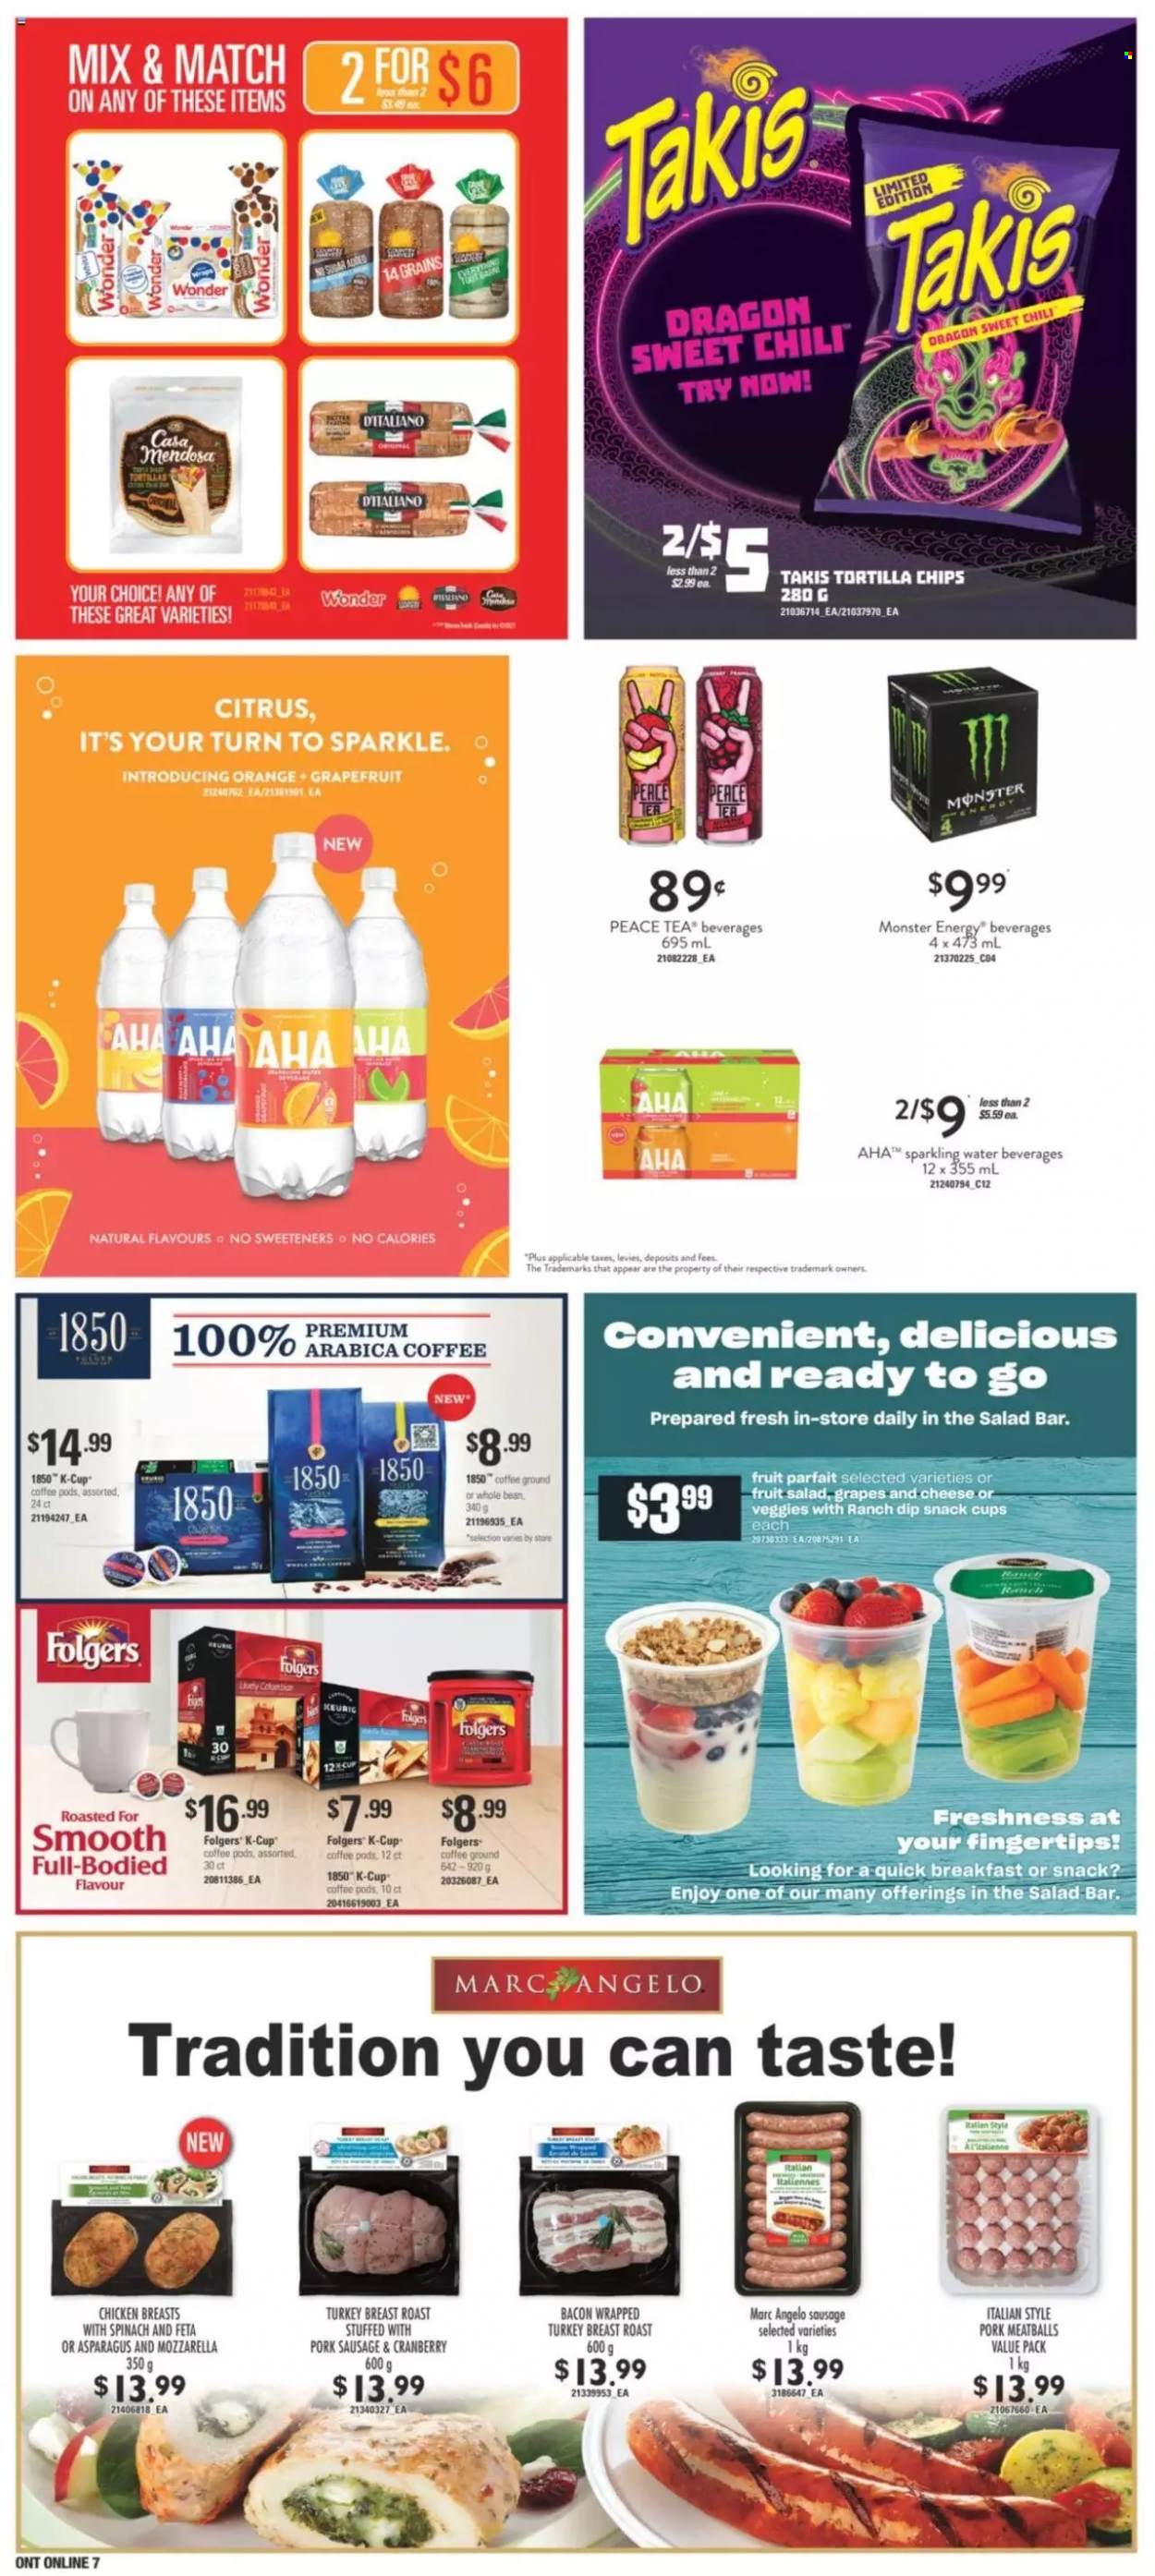 thumbnail - Independent Flyer - September 23, 2021 - September 29, 2021 - Sales products - asparagus, grapefruits, grapes, meatballs, bacon, sausage, pork sausage, feta, dip, tortilla chips, fruit salad, Monster, Monster Energy, sparkling water, tea, coffee pods, Folgers, coffee capsules, K-Cups, turkey breast, chicken breasts, turkey, chips, oranges. Page 10.